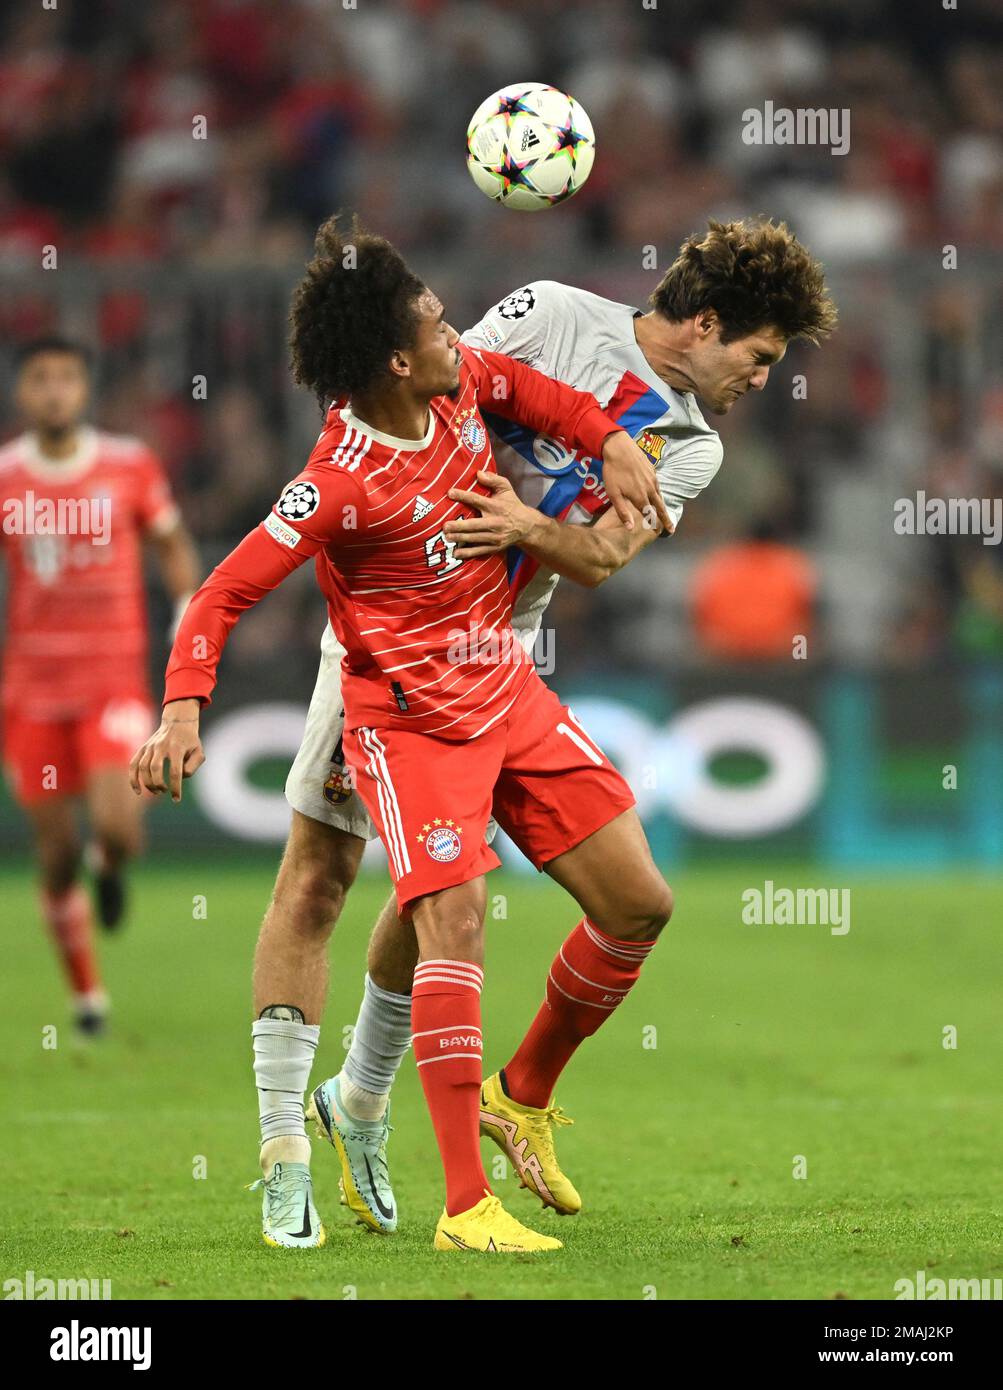 Barcelona's Marcos Alonso, right, challenges for the ball with Bayern's  Leroy Sane during the Champions League, group C soccer match between Bayern  Munich and Barcelona at the Allianz Arena in Munich, Germany,